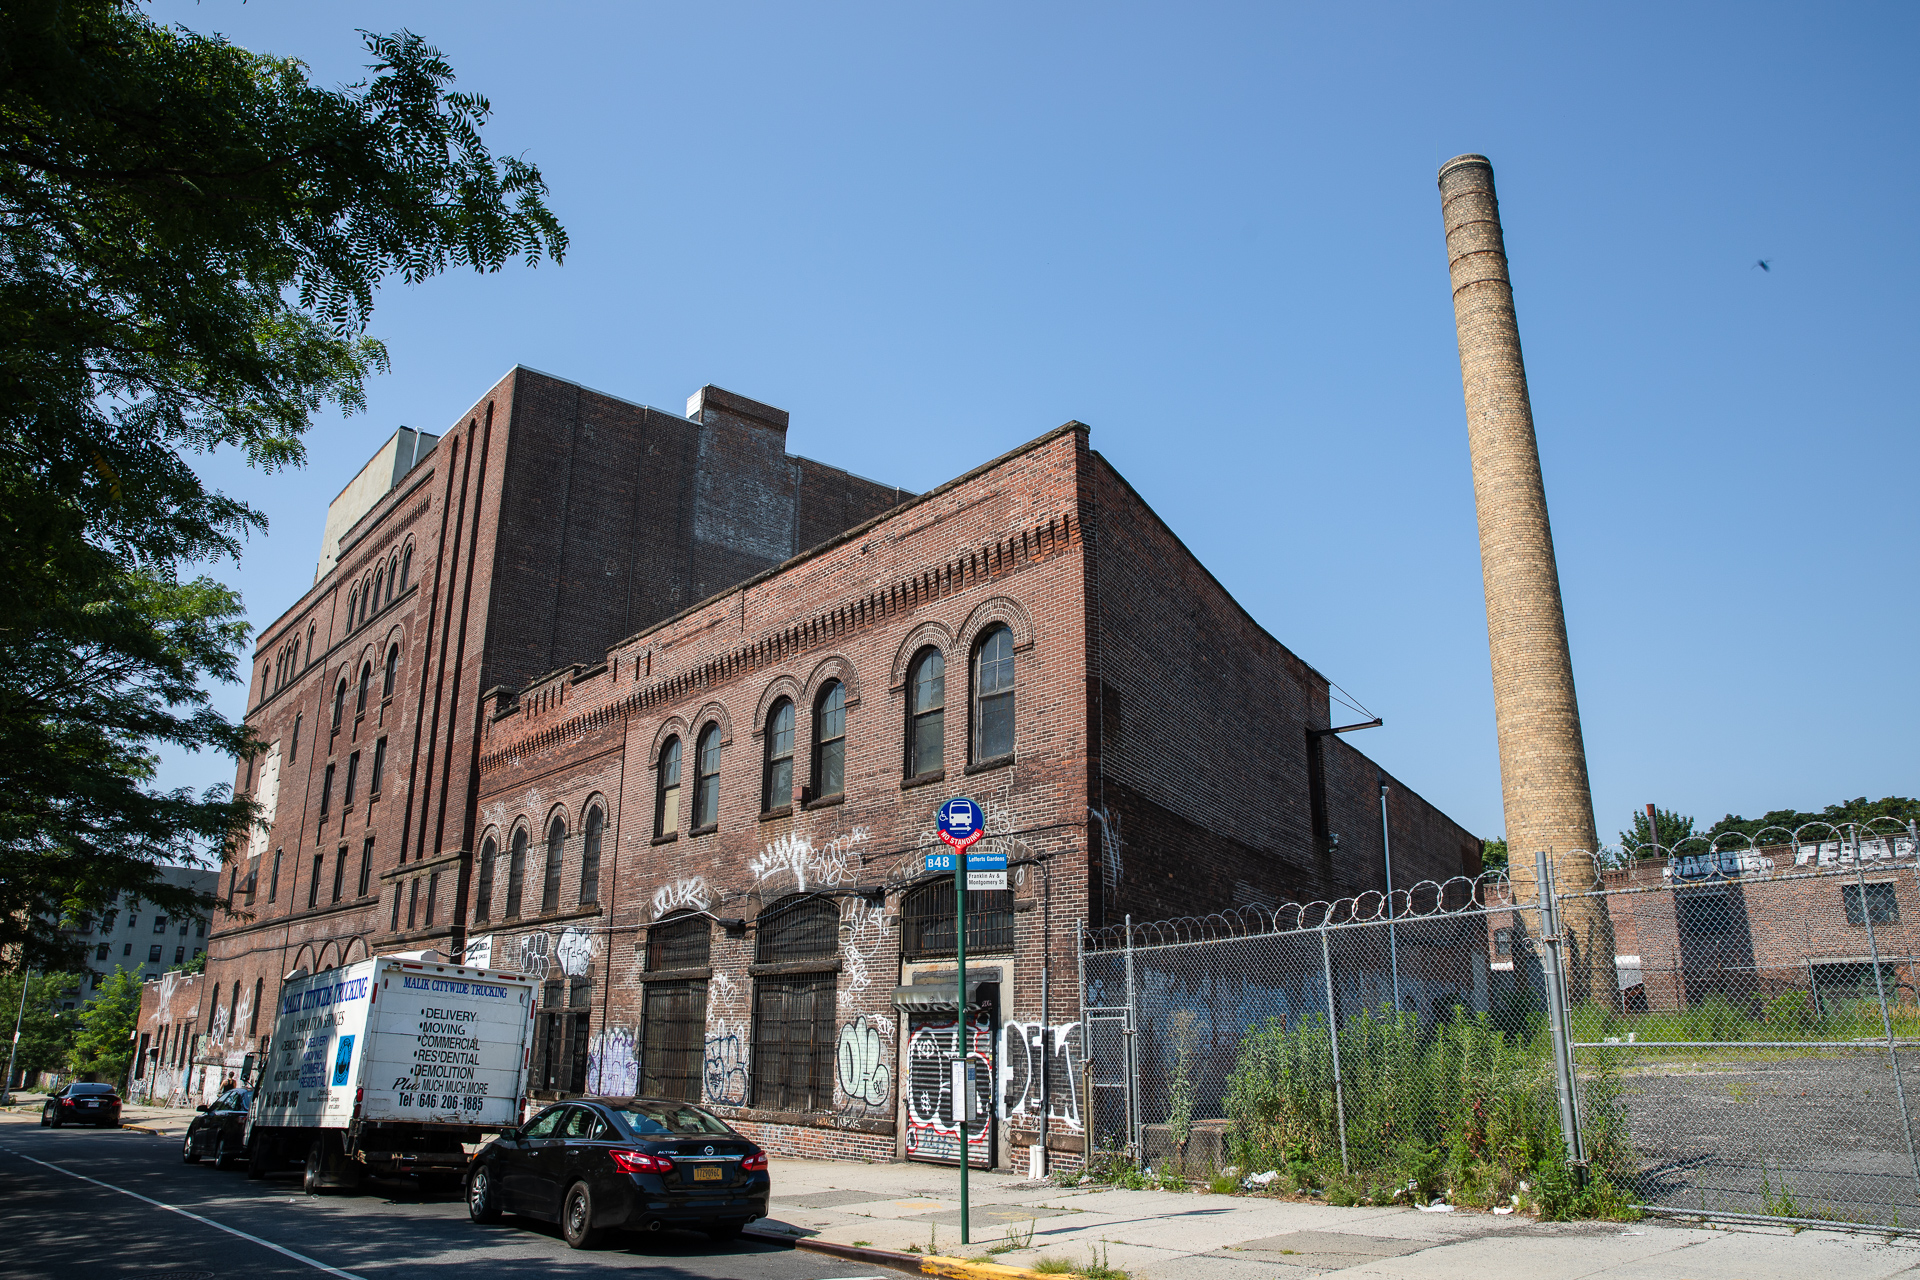 This is the Spice Factory, where developers plan to construct a pair of tall towers. Photo: Paul Frangipane/Brooklyn Eagle